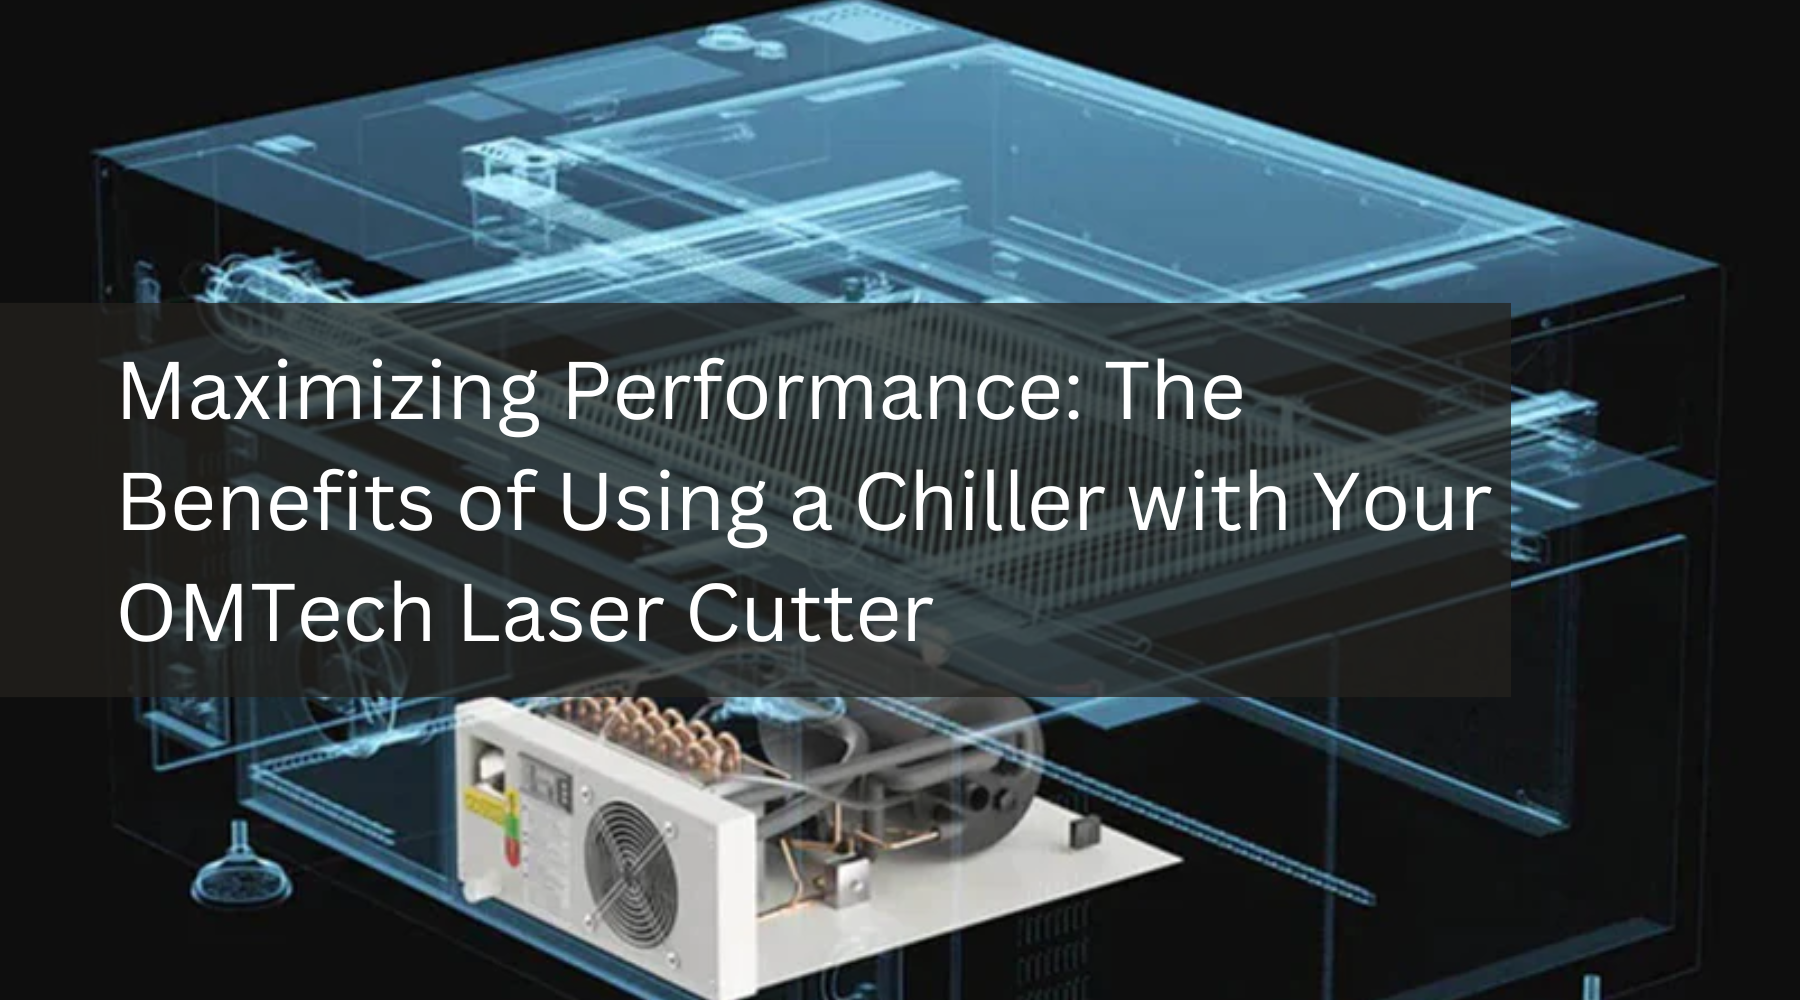 Maximizing Performance: The Benefits of Using a Chiller with Your OMTech Laser Cutter